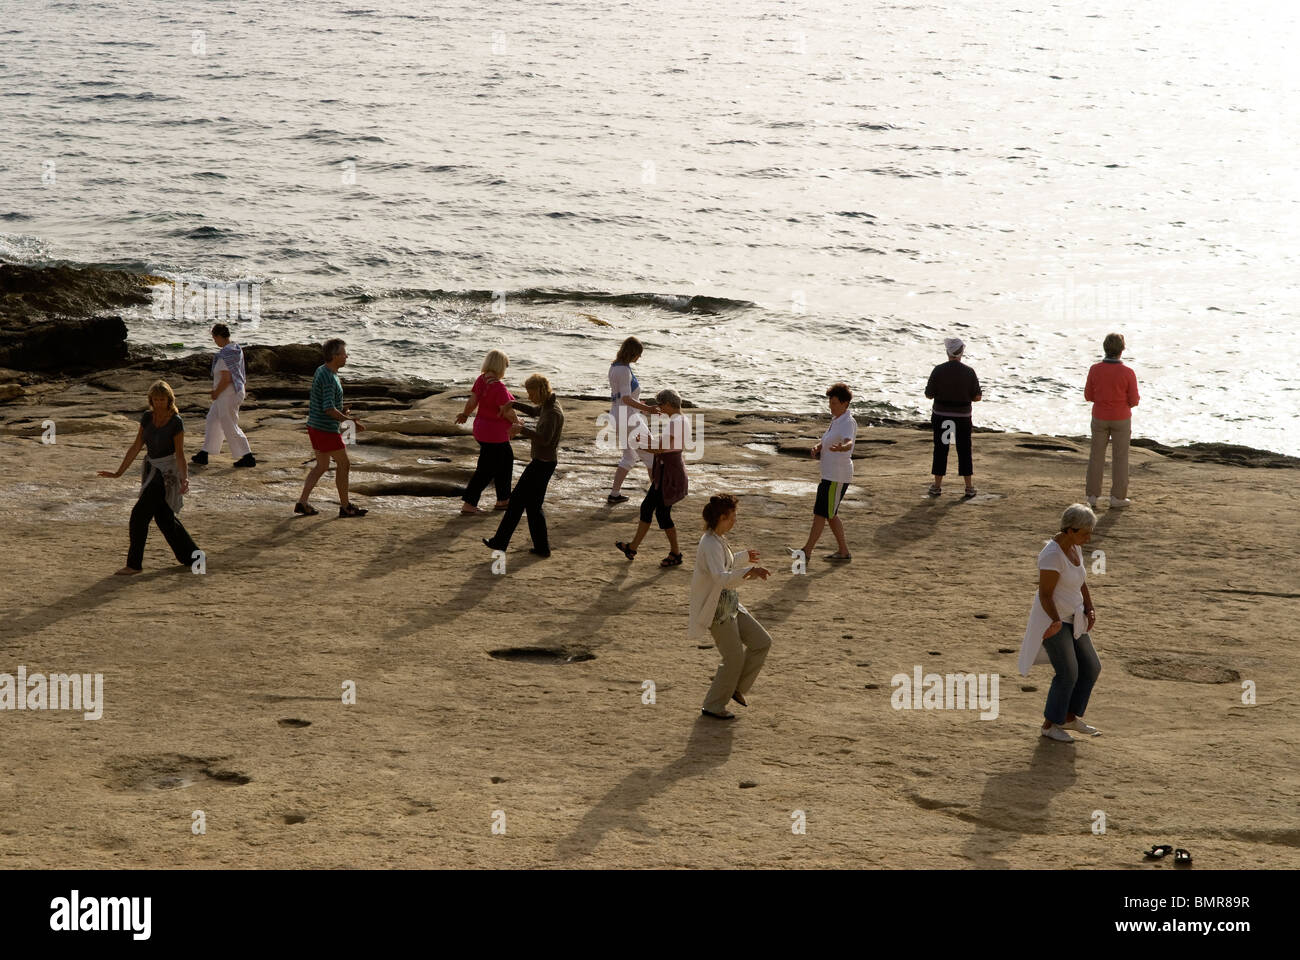 People doing early morning Tai Chi on the Sliema seafront, Malta. Stock Photo